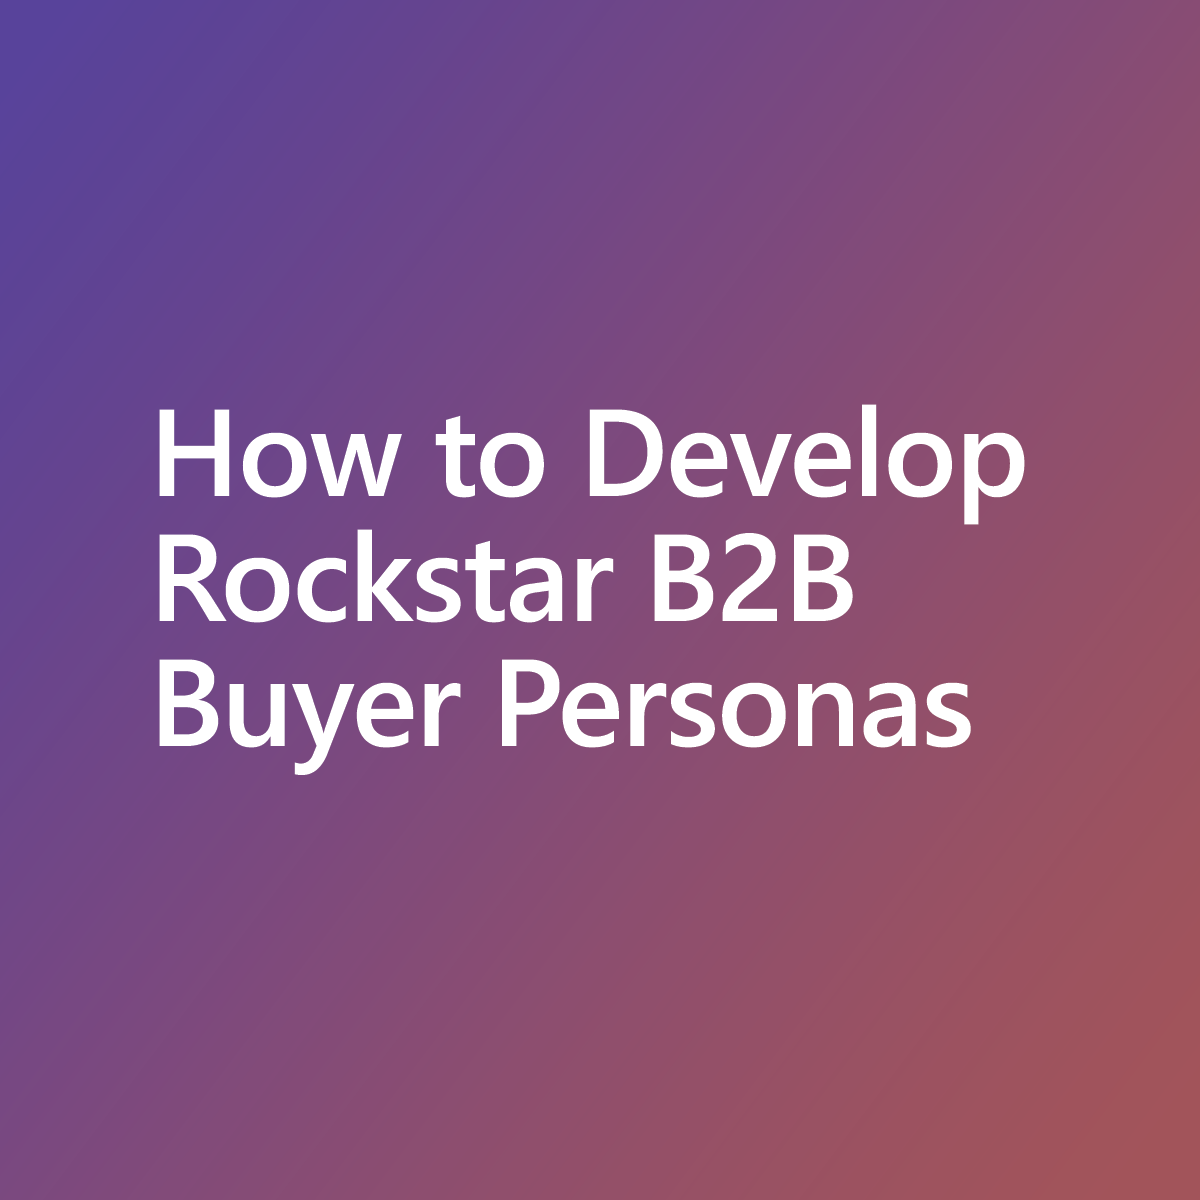 how-to-develop-b2b-buyer-personas-graphic